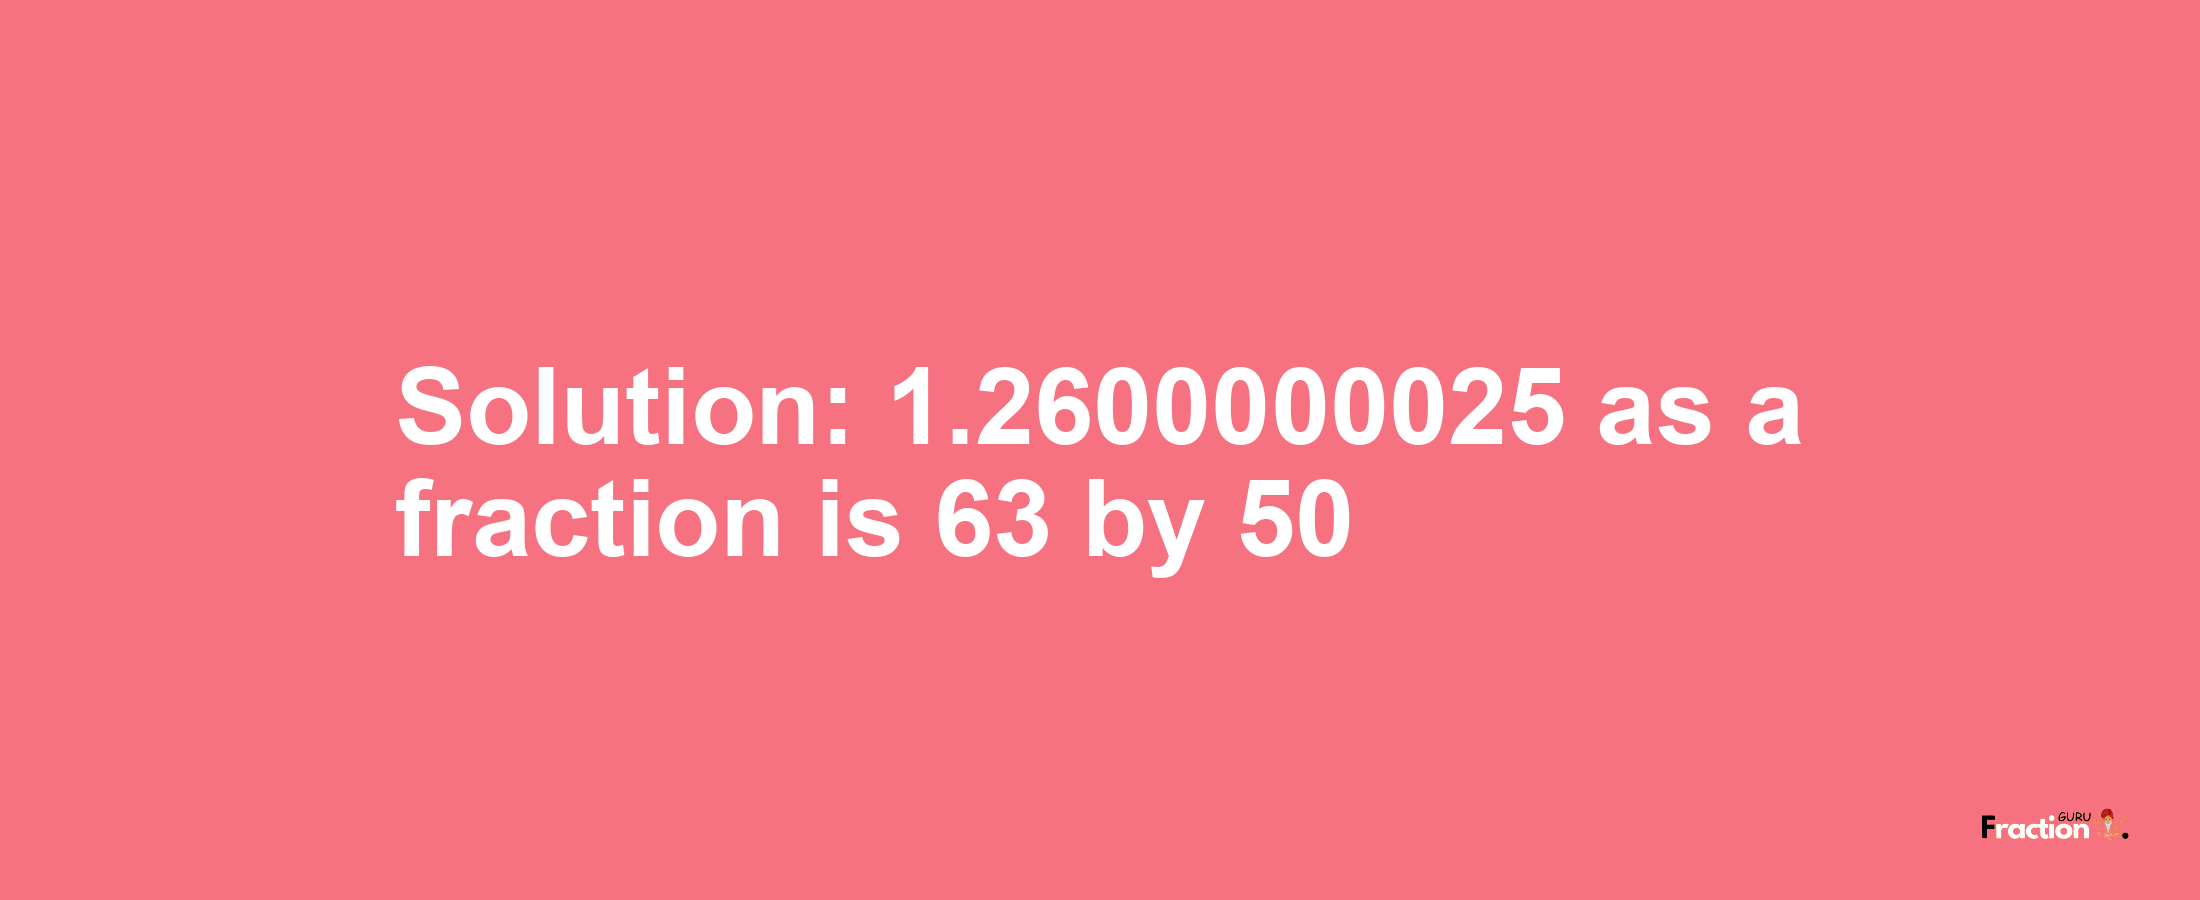 Solution:1.2600000025 as a fraction is 63/50